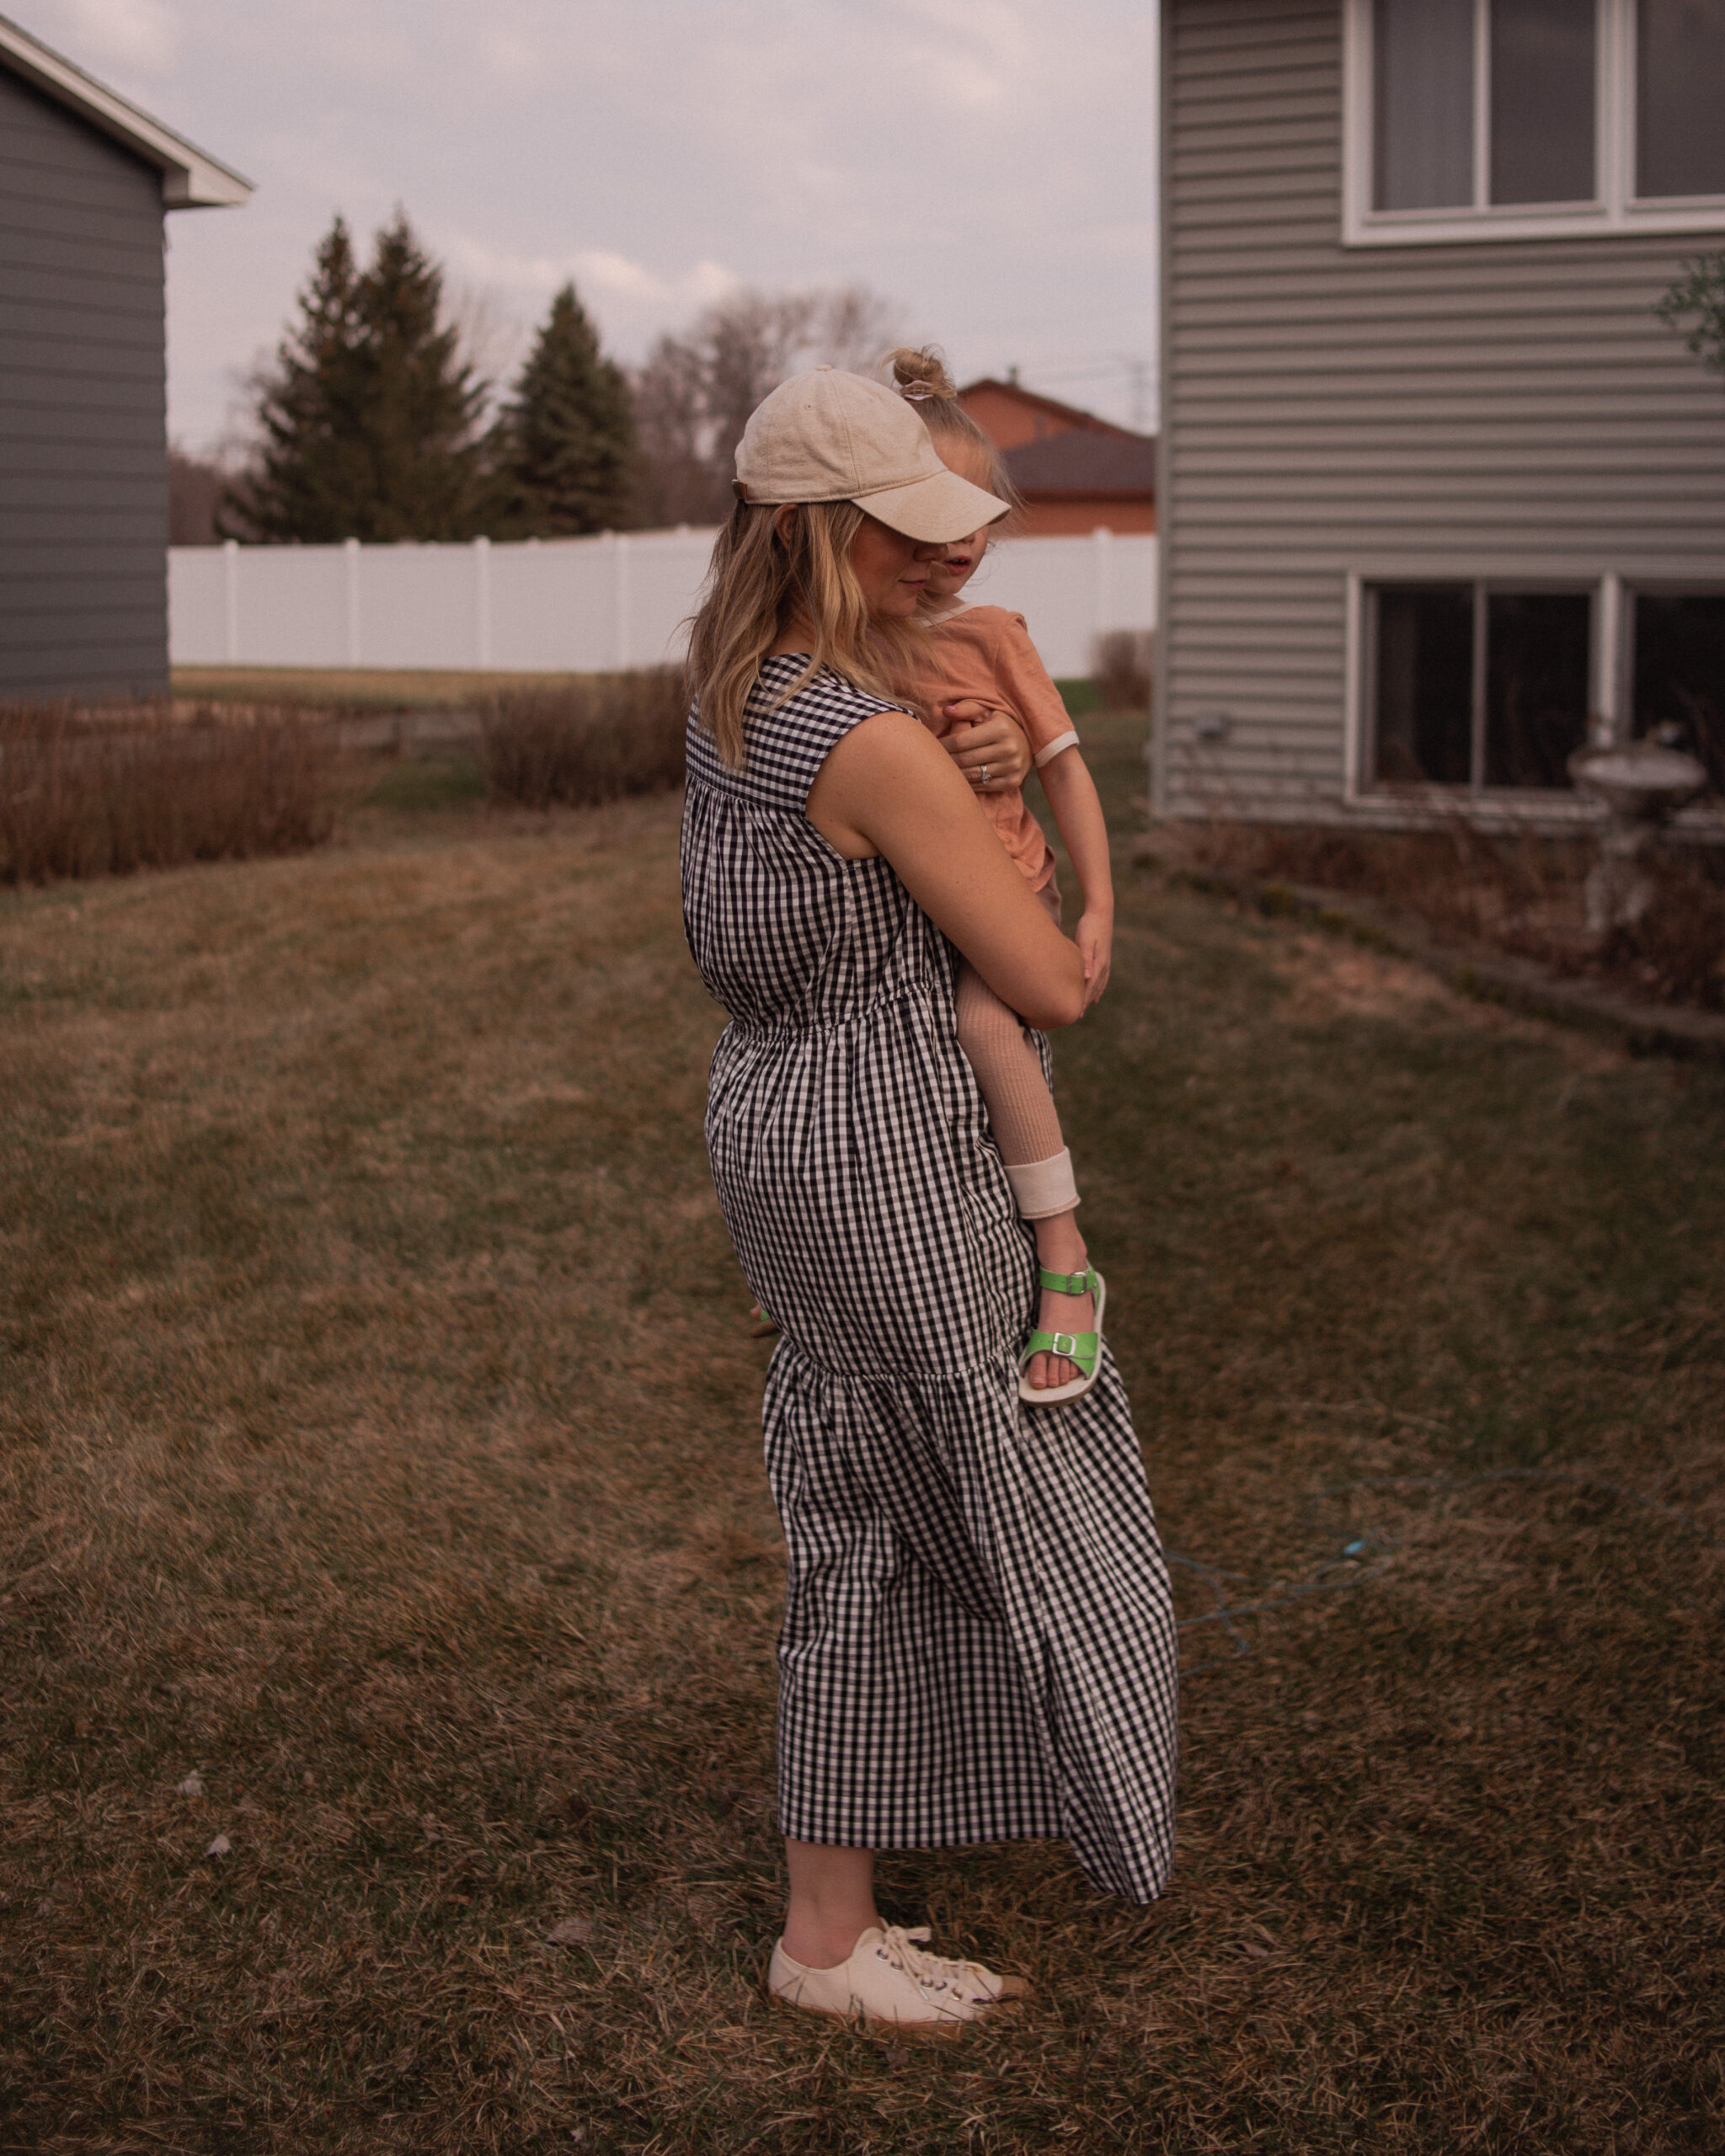 Karin Emily wears a gingham maxi dress from Everlane with canvas sneakers and a neutral baseball hat